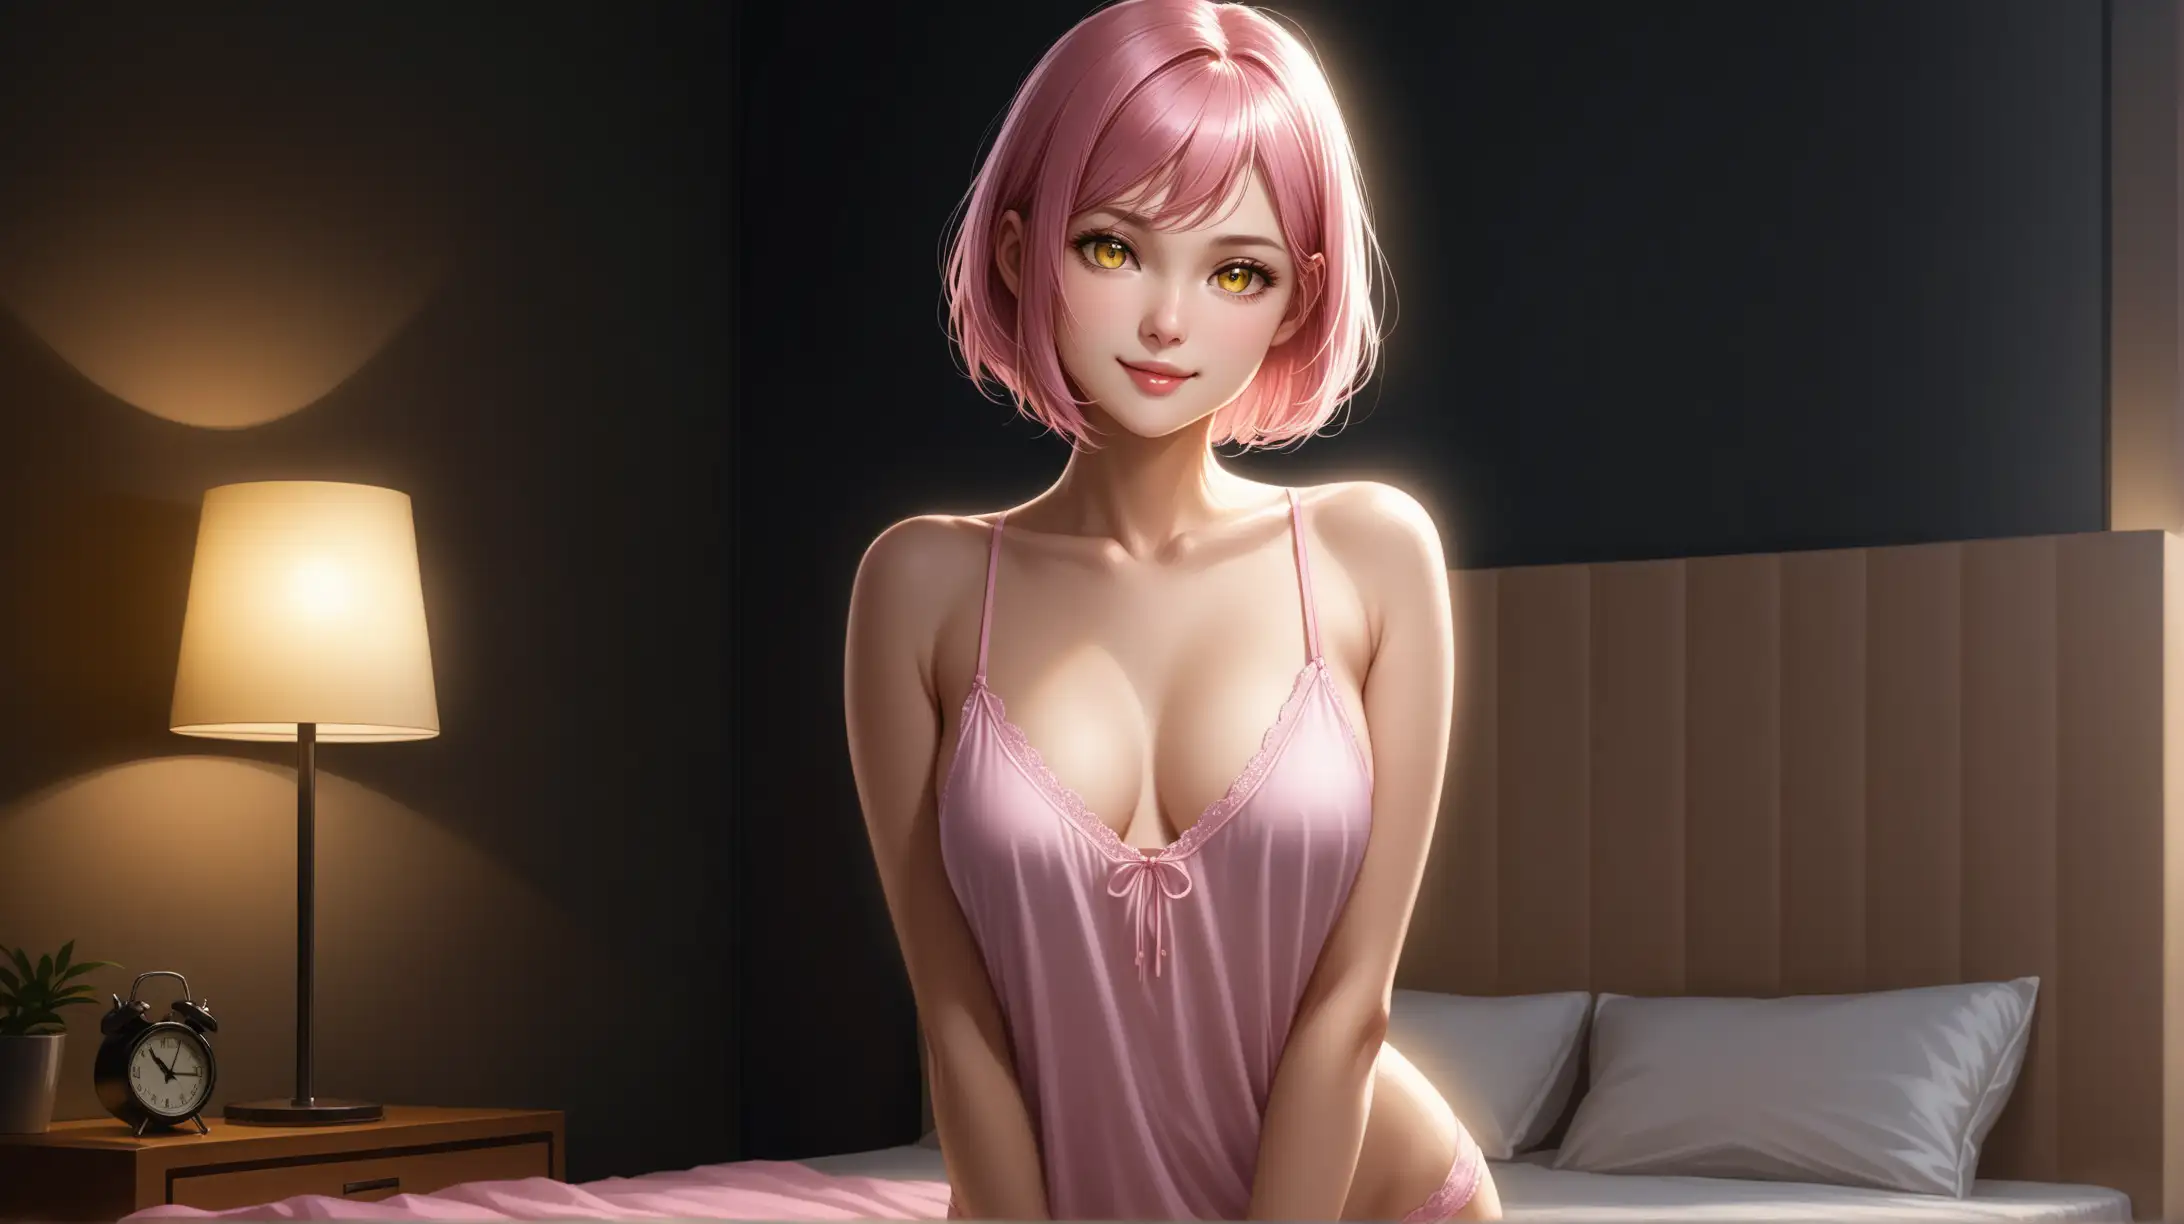 Draw a woman, short pink hair, yellow ringed eyes, slender figure, high quality, realistic, accurate, detailed, long shot, indoors, bedroom, dim lighting, nighttime, sleepwear, revealing, seductive pose, smiling toward viewer